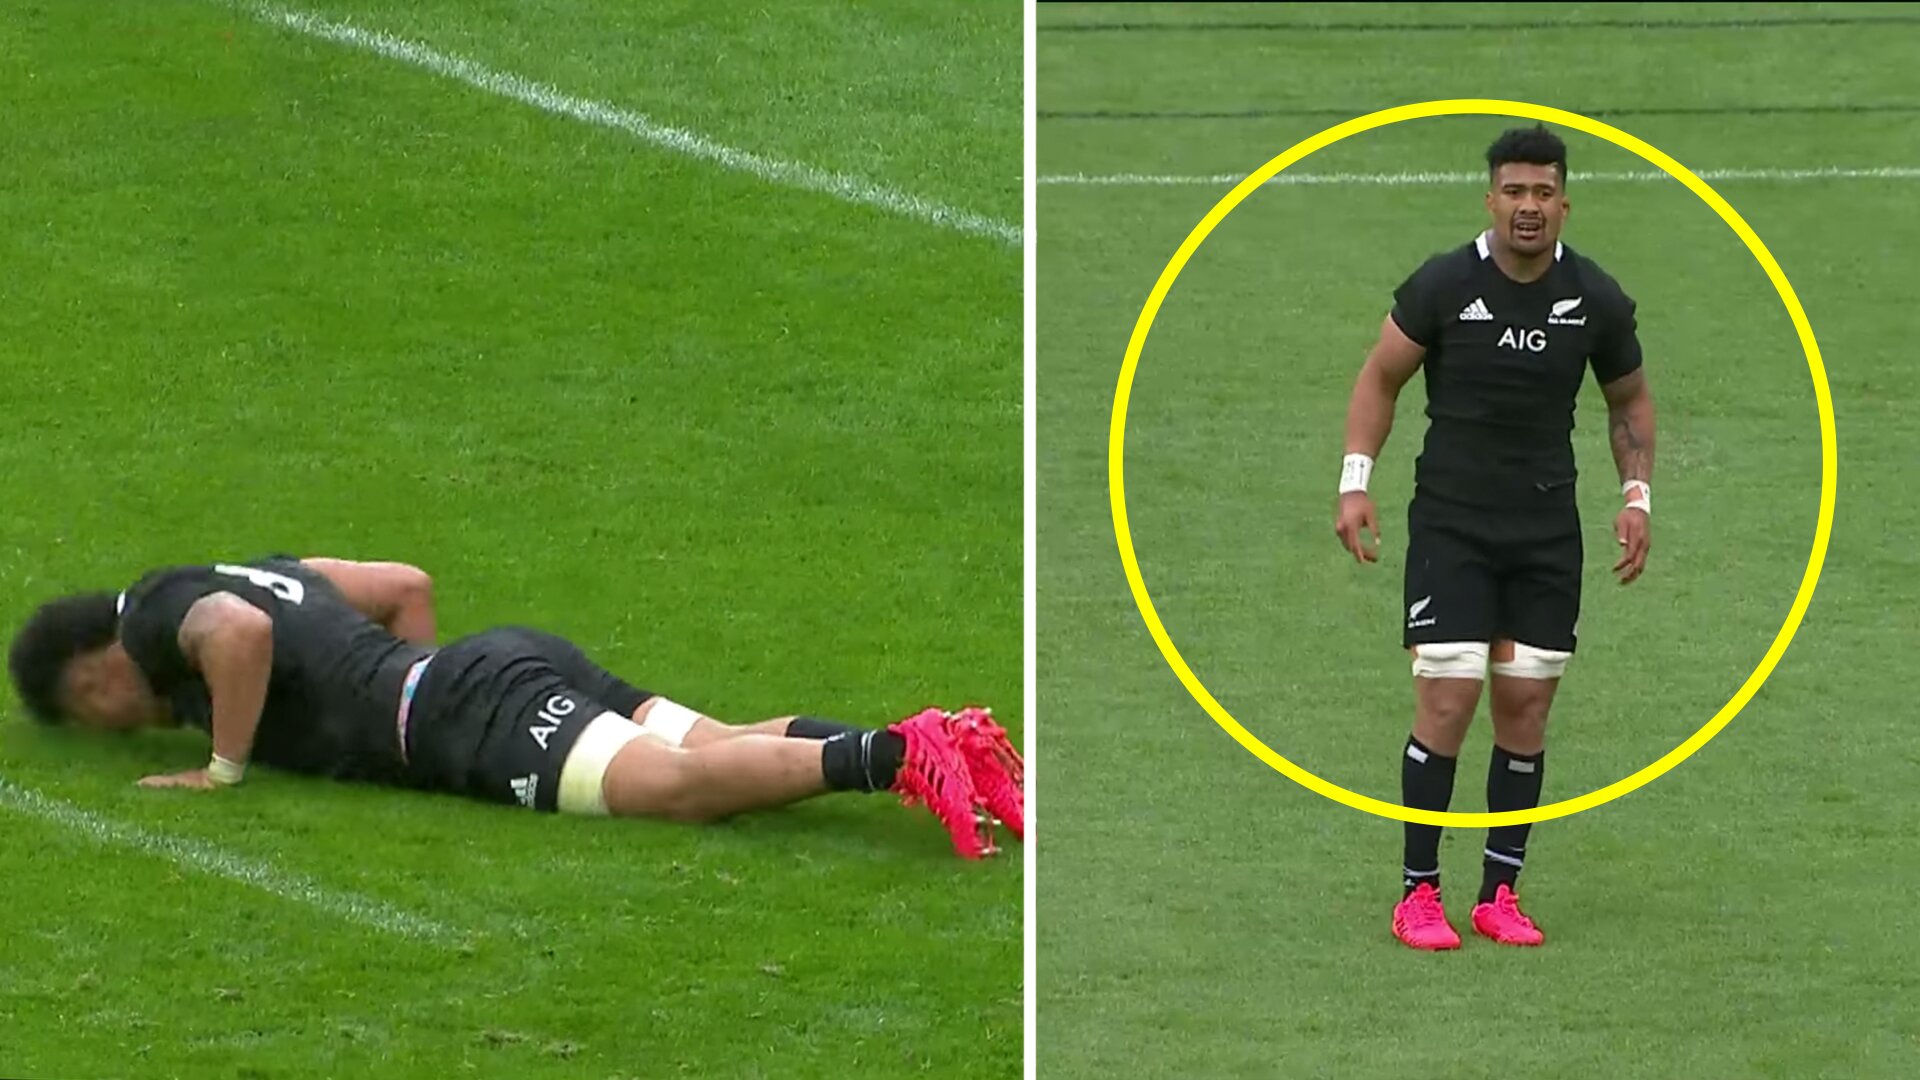 New Ardie Savea player cam reveals the incredible moment he saves the game despite being injured